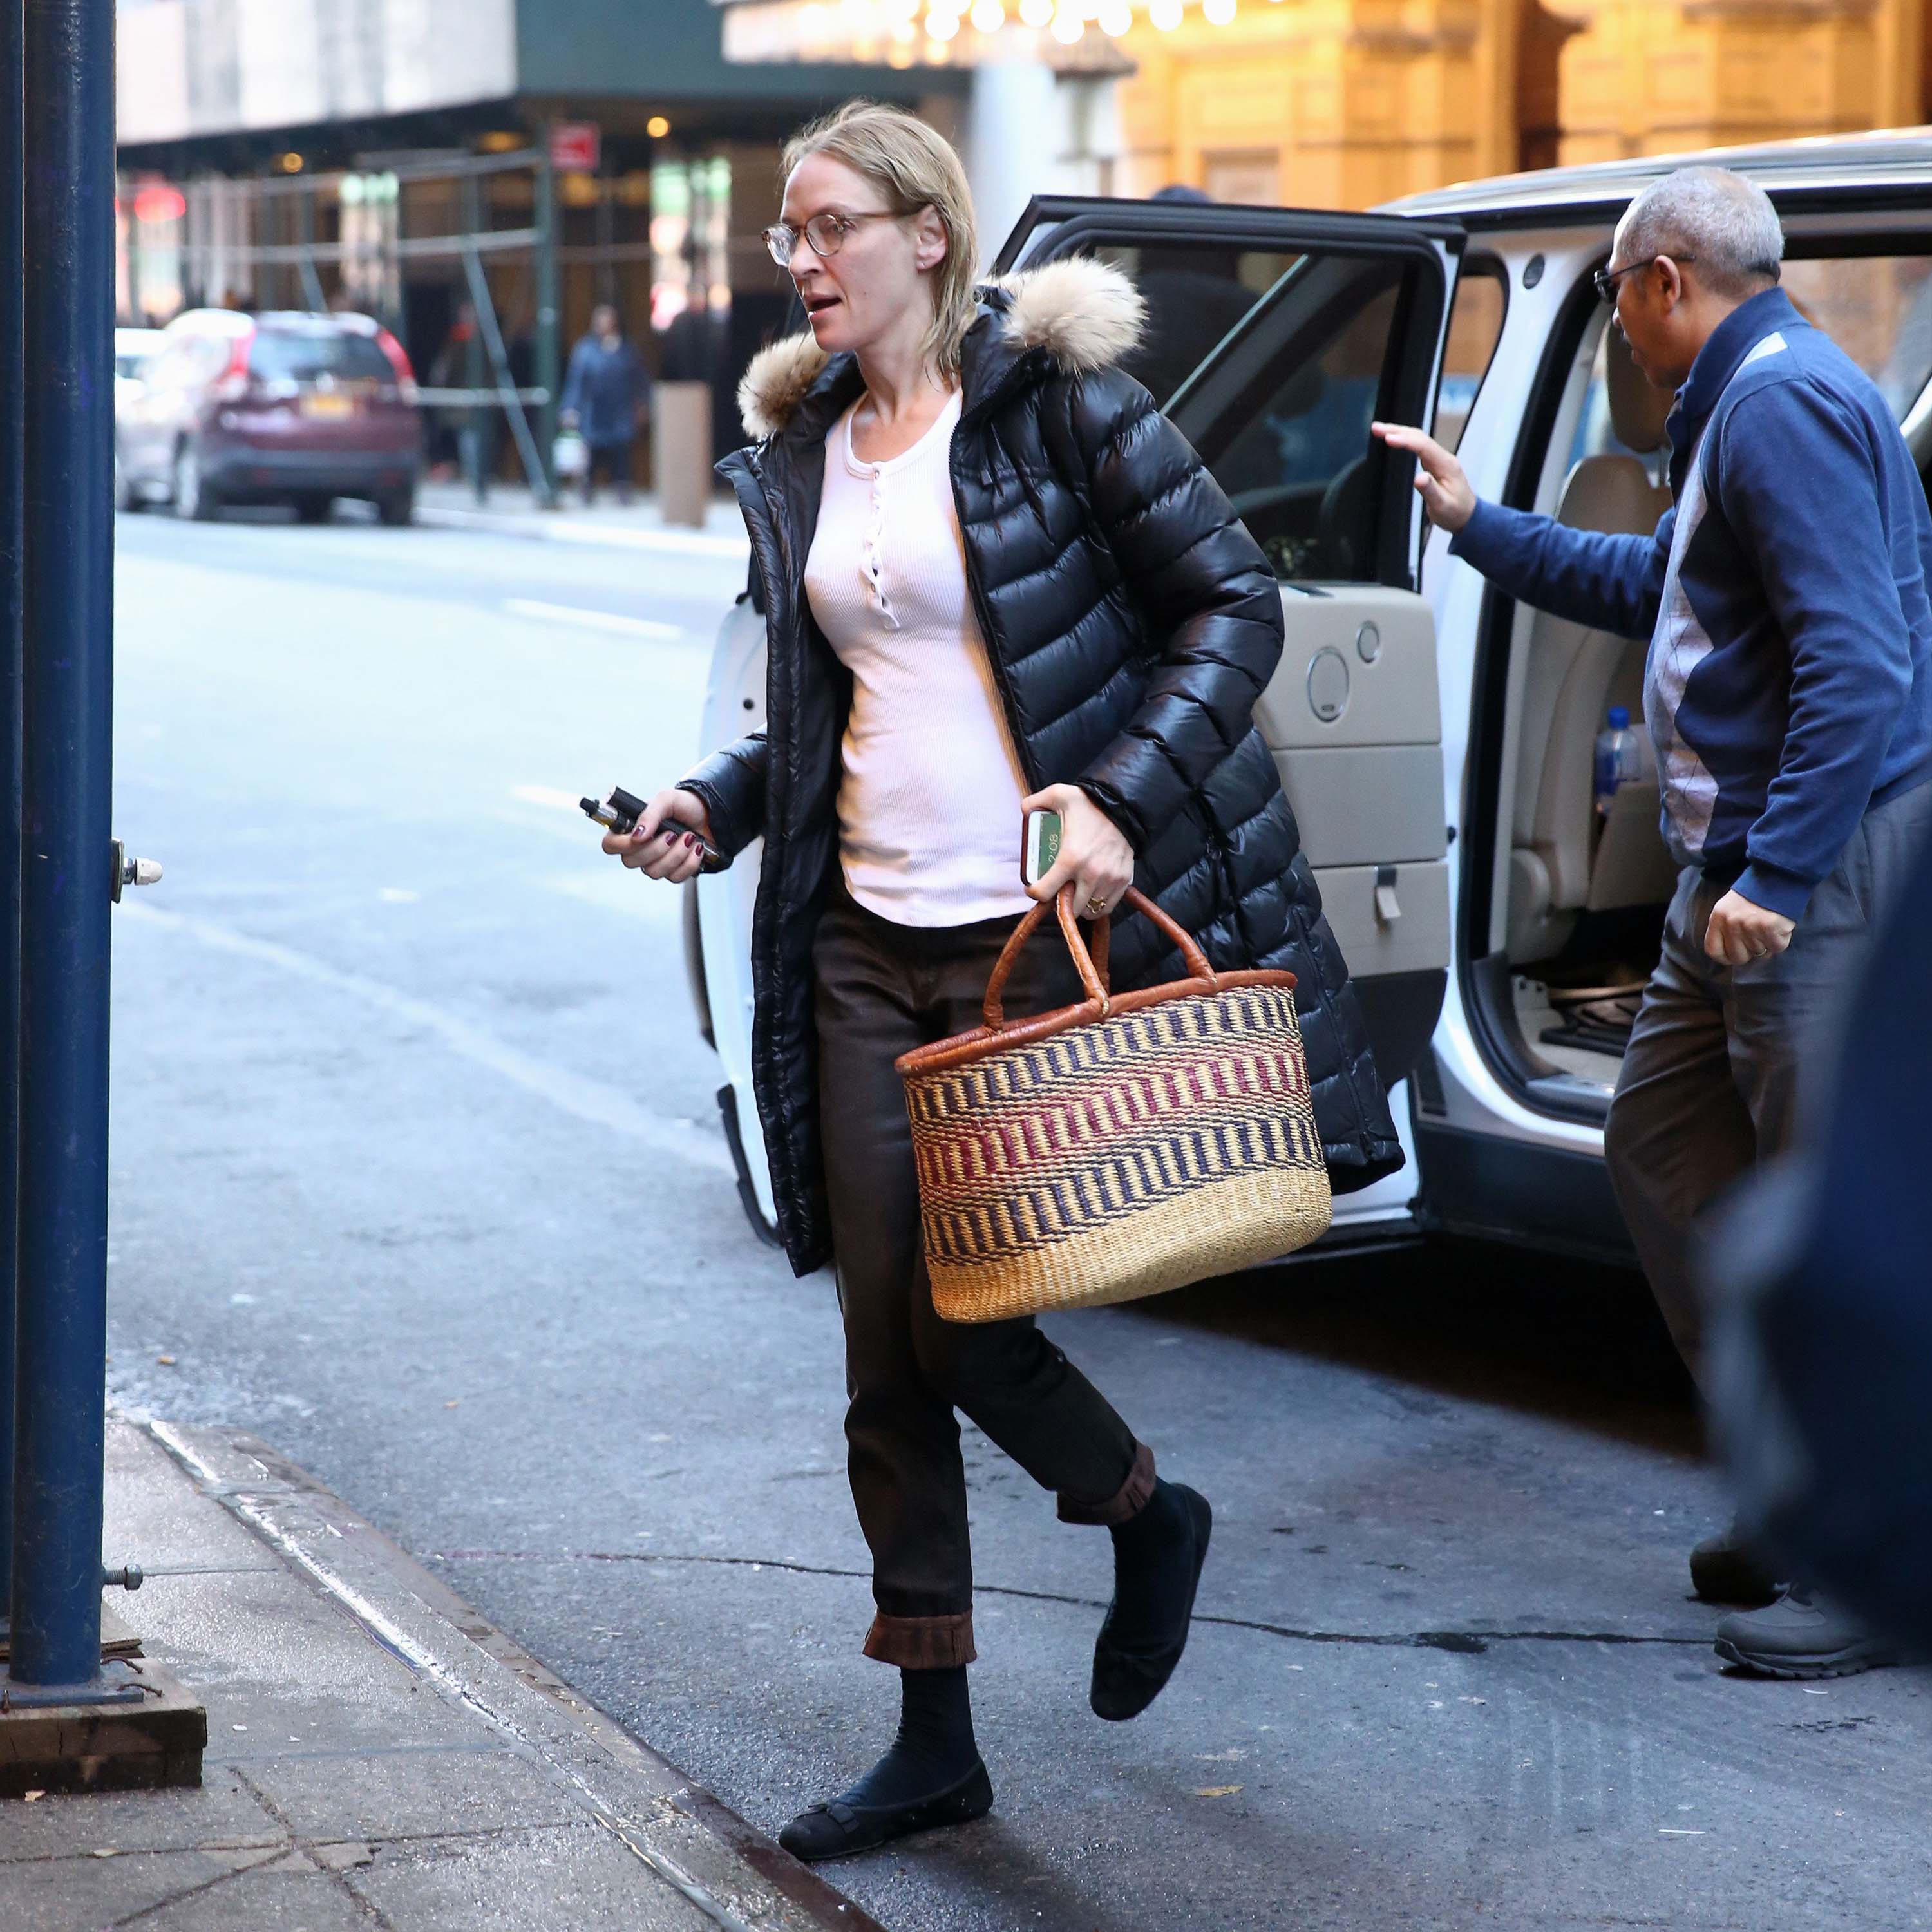 Uma Thurman arrives at the Hudson Theatre for her matinee performance